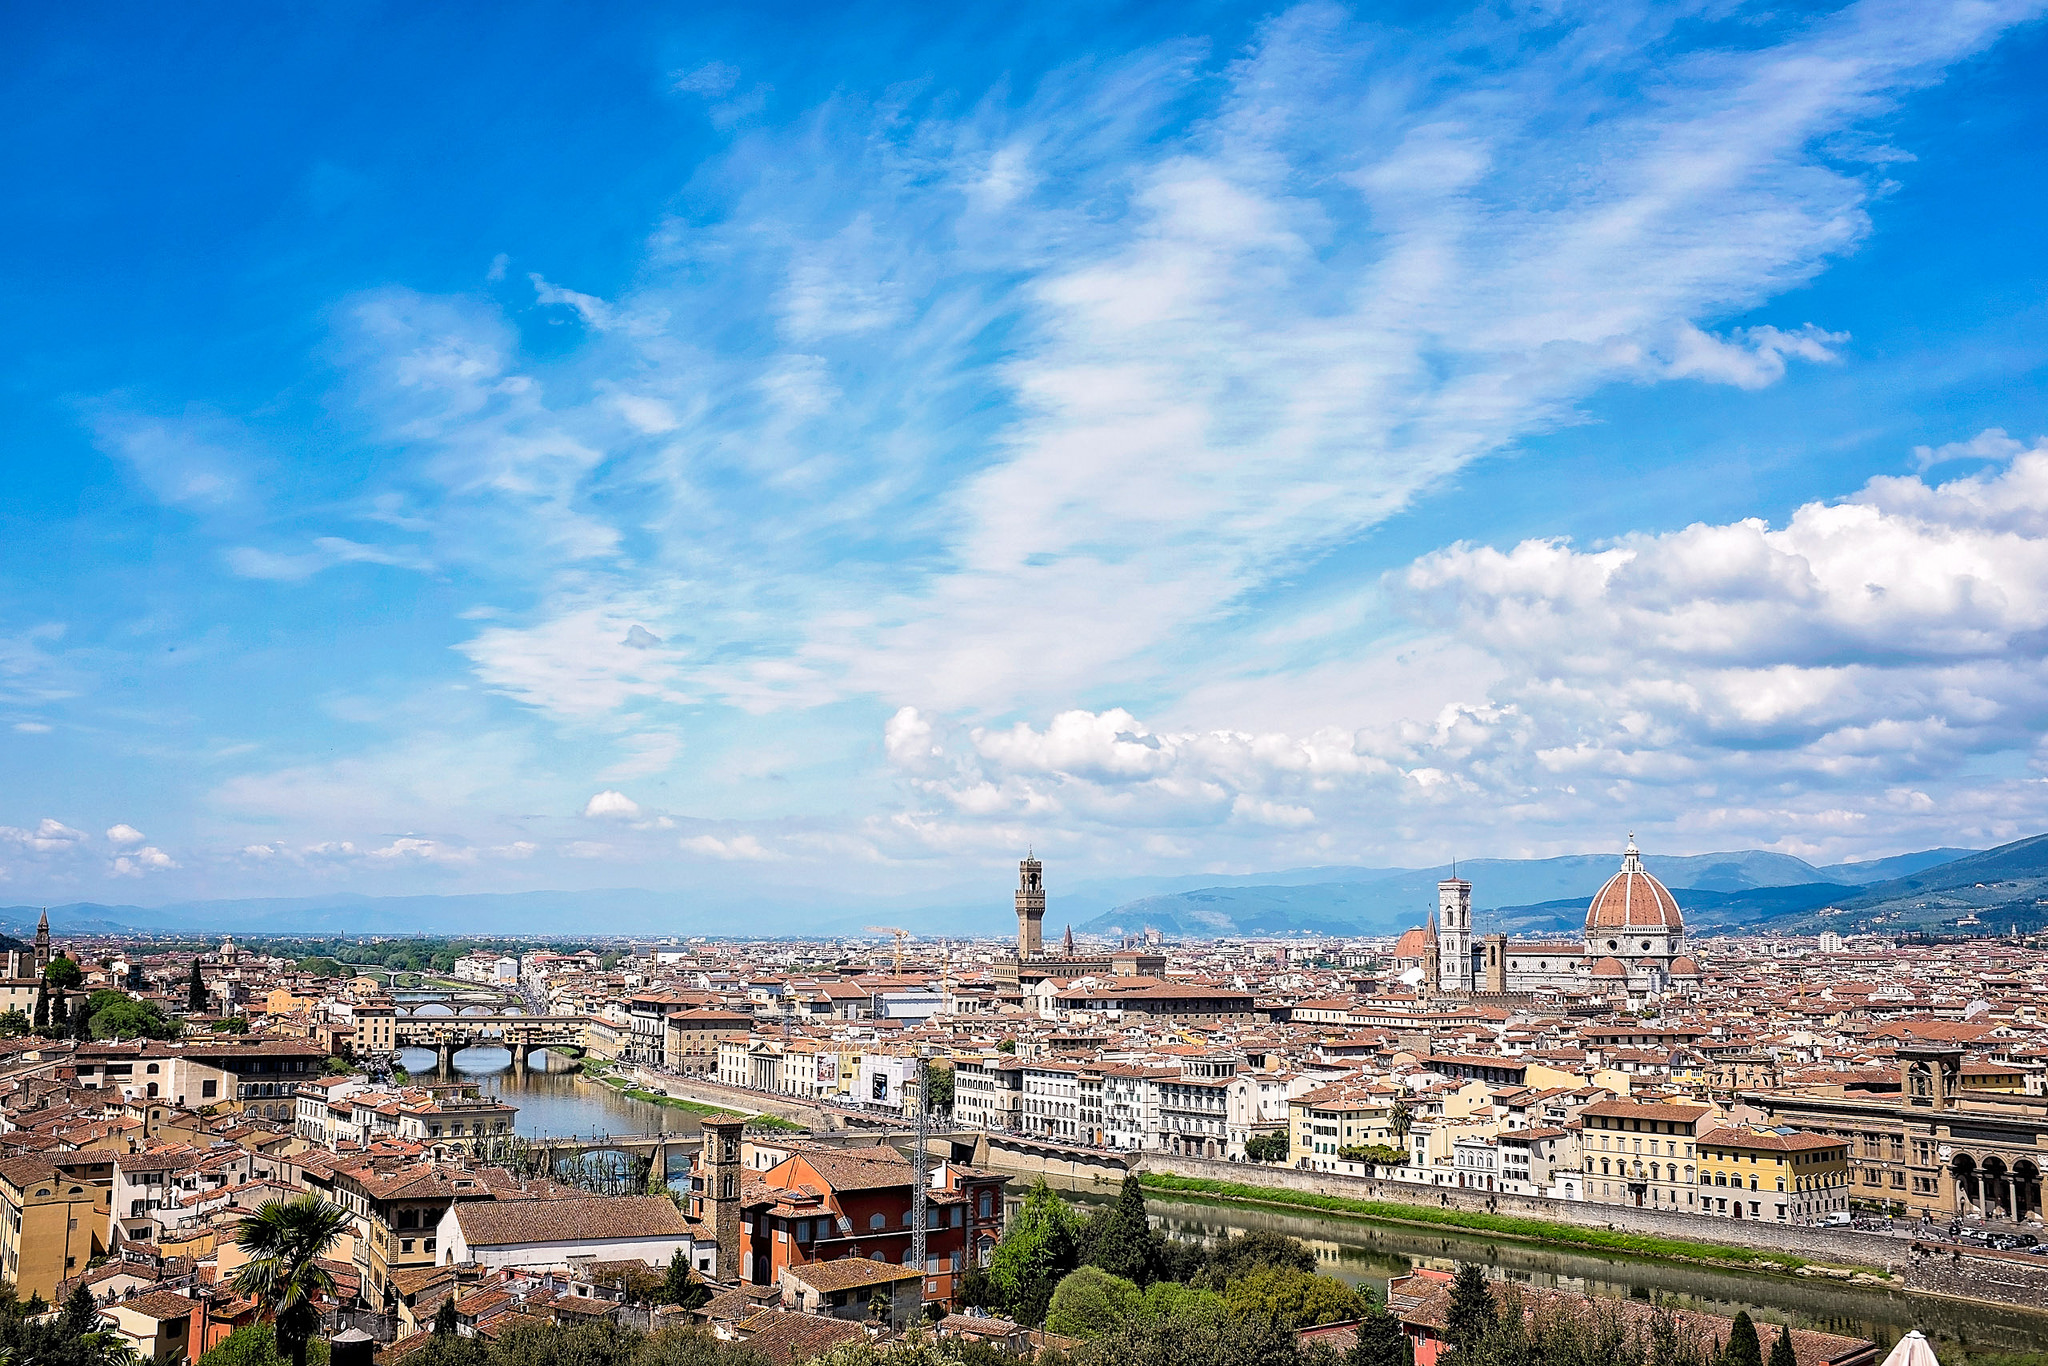 View from Piazzale Michelangelo | Photo by Yann Le Moing